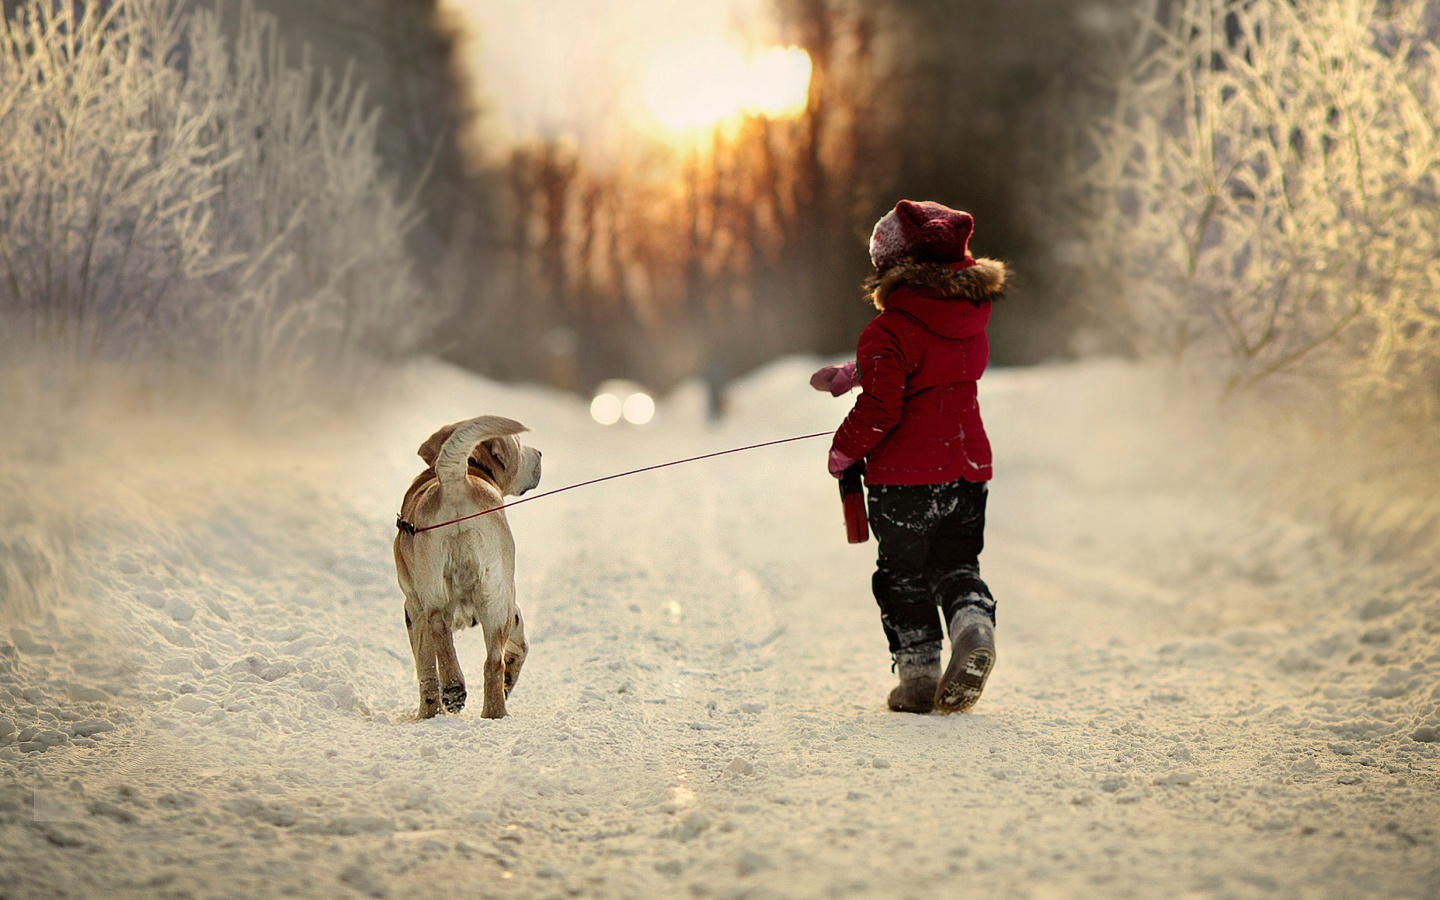 Winter Walking with Dog wallpaper 1440x900